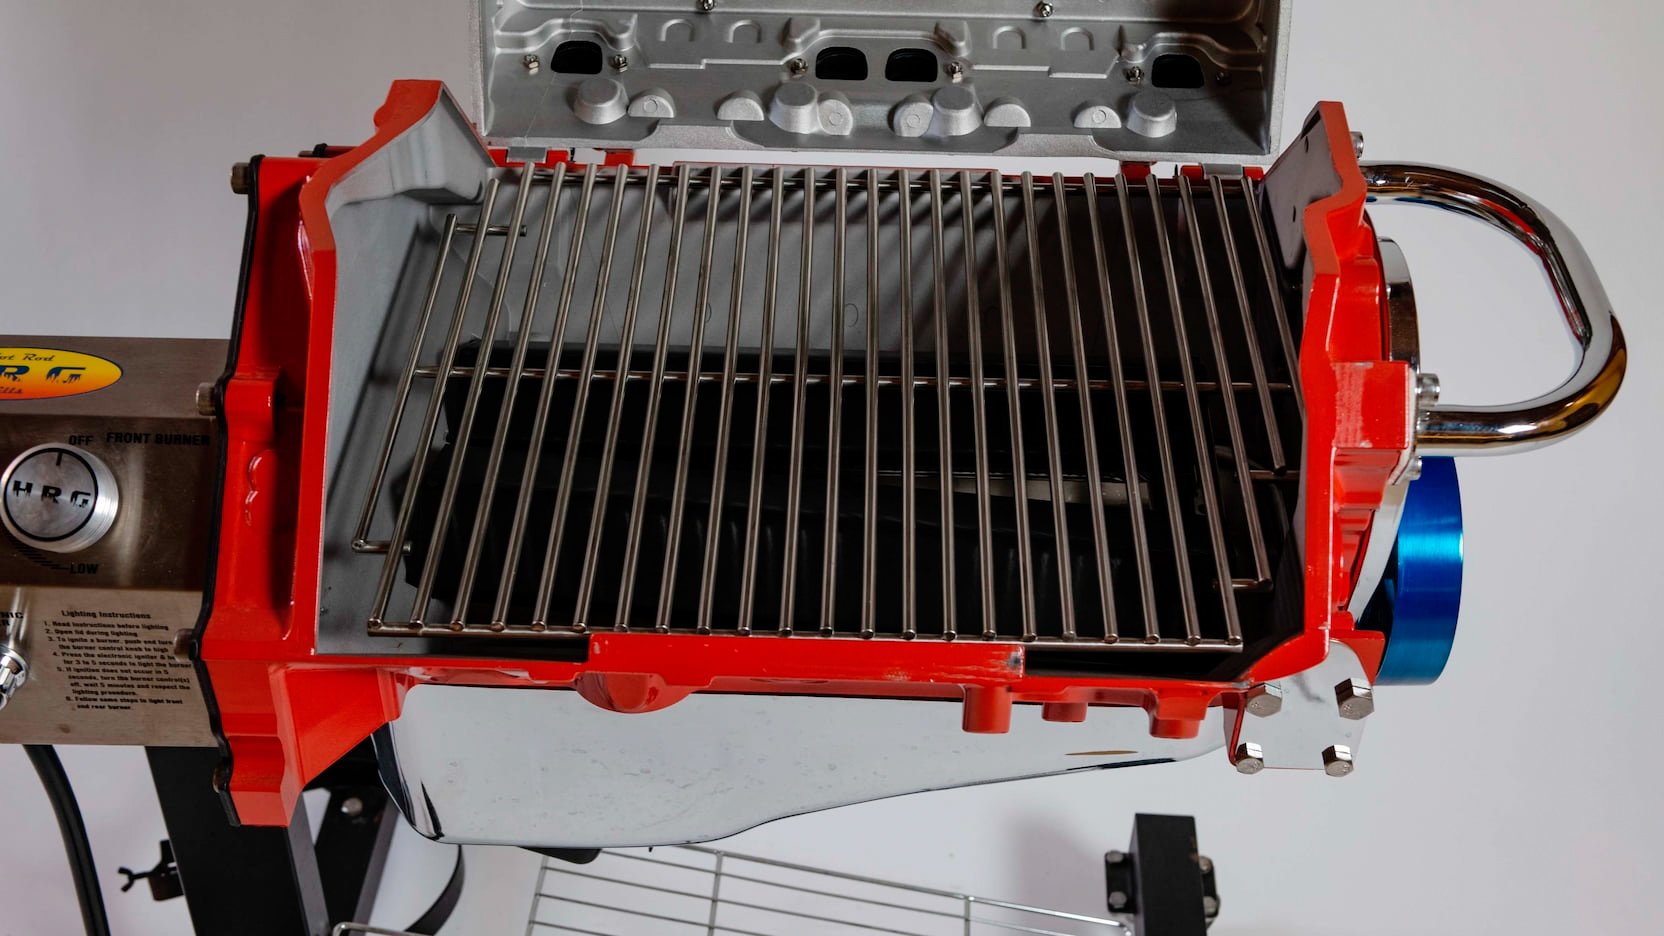 tykkelse paraply maksimere The Hot Rod Grill Barbecue V8